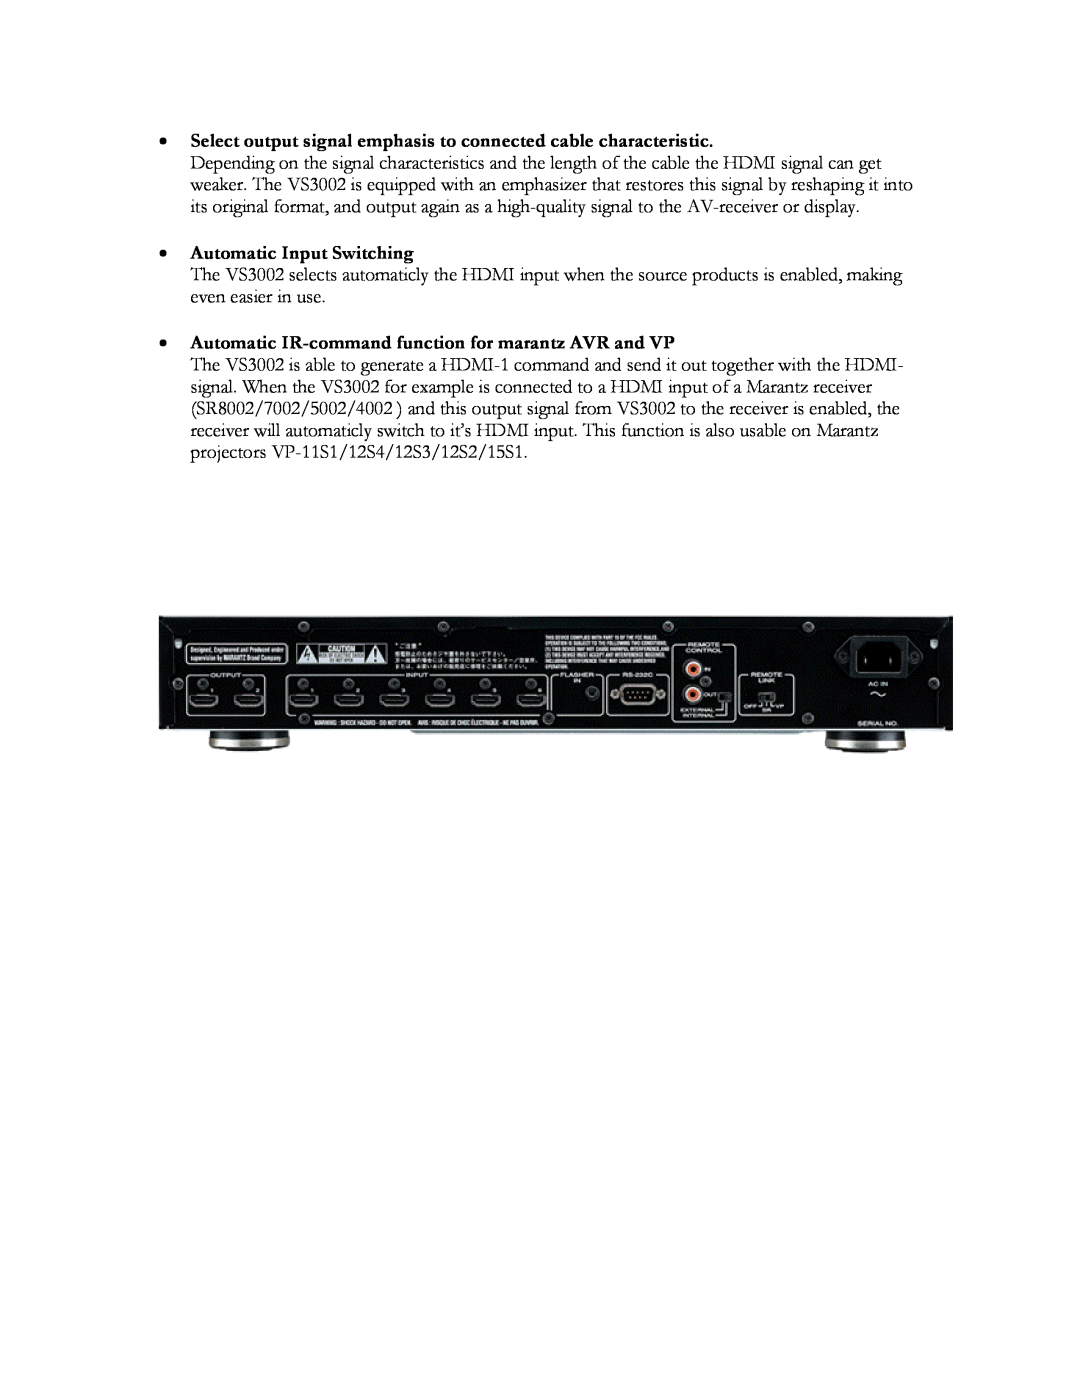 Marantz VS3002 manual Select output signal emphasis to connected cable characteristic, Automatic Input Switching 